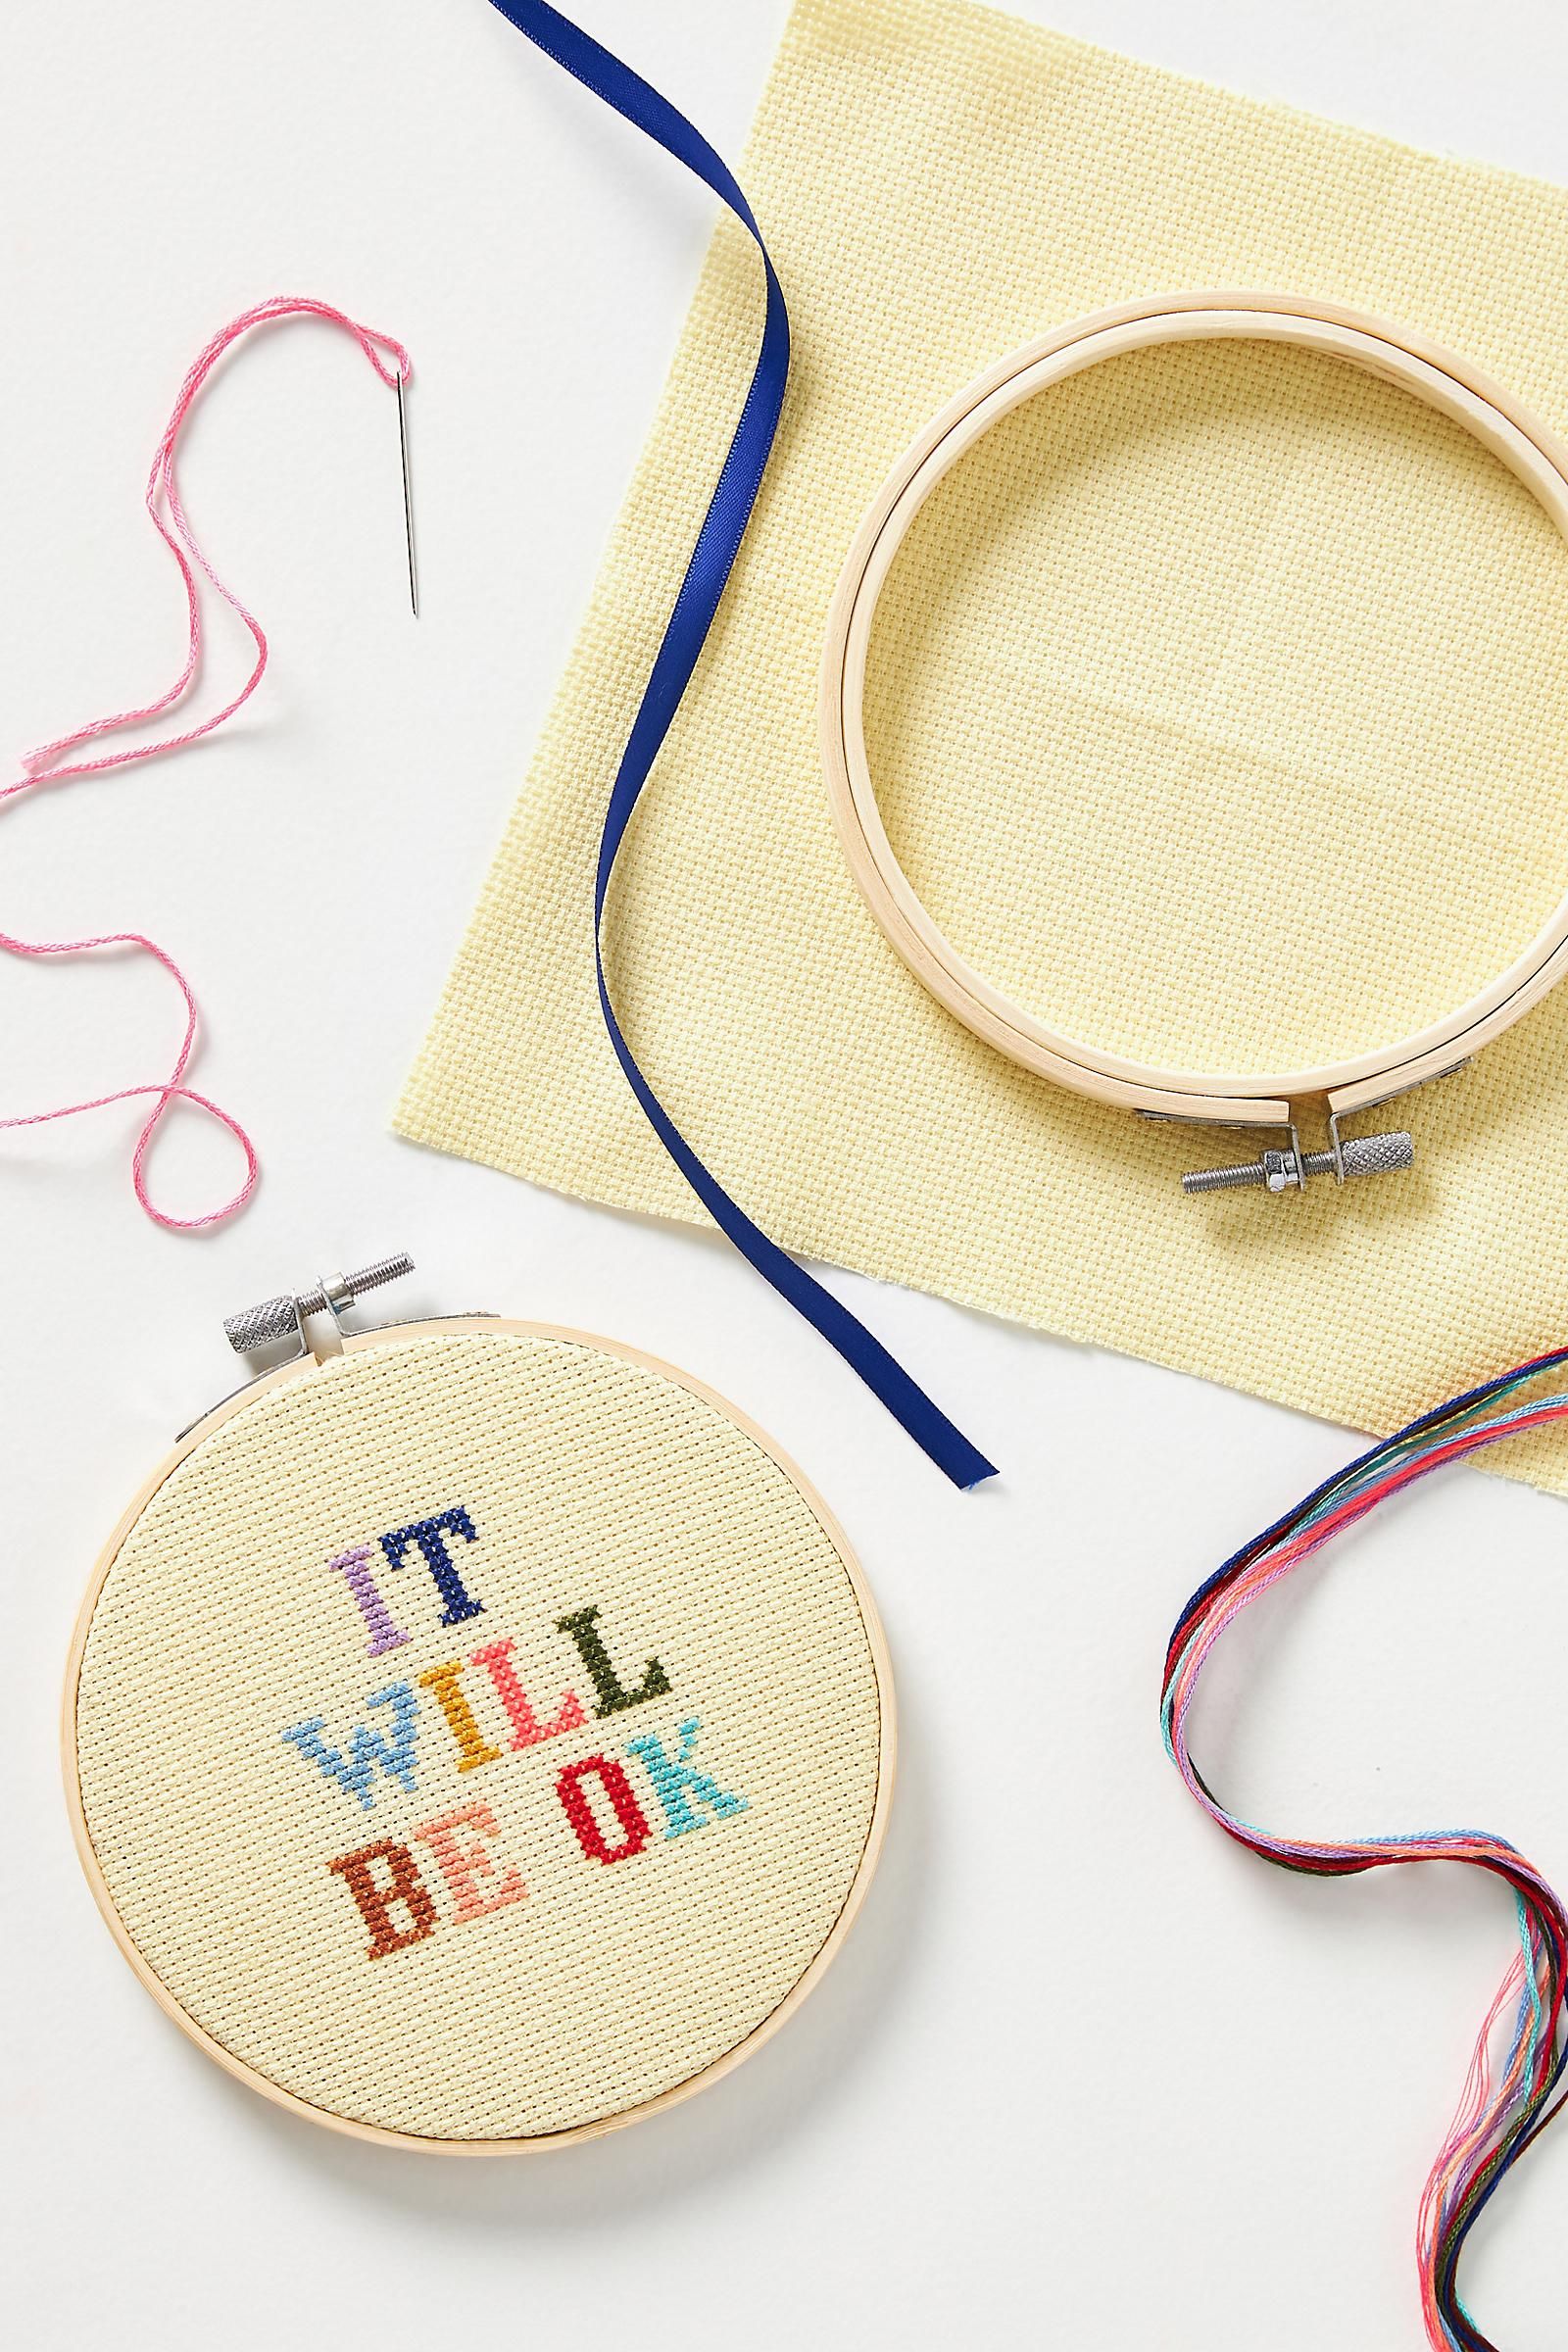 It Will Be Ok Embroidery DIY Kits